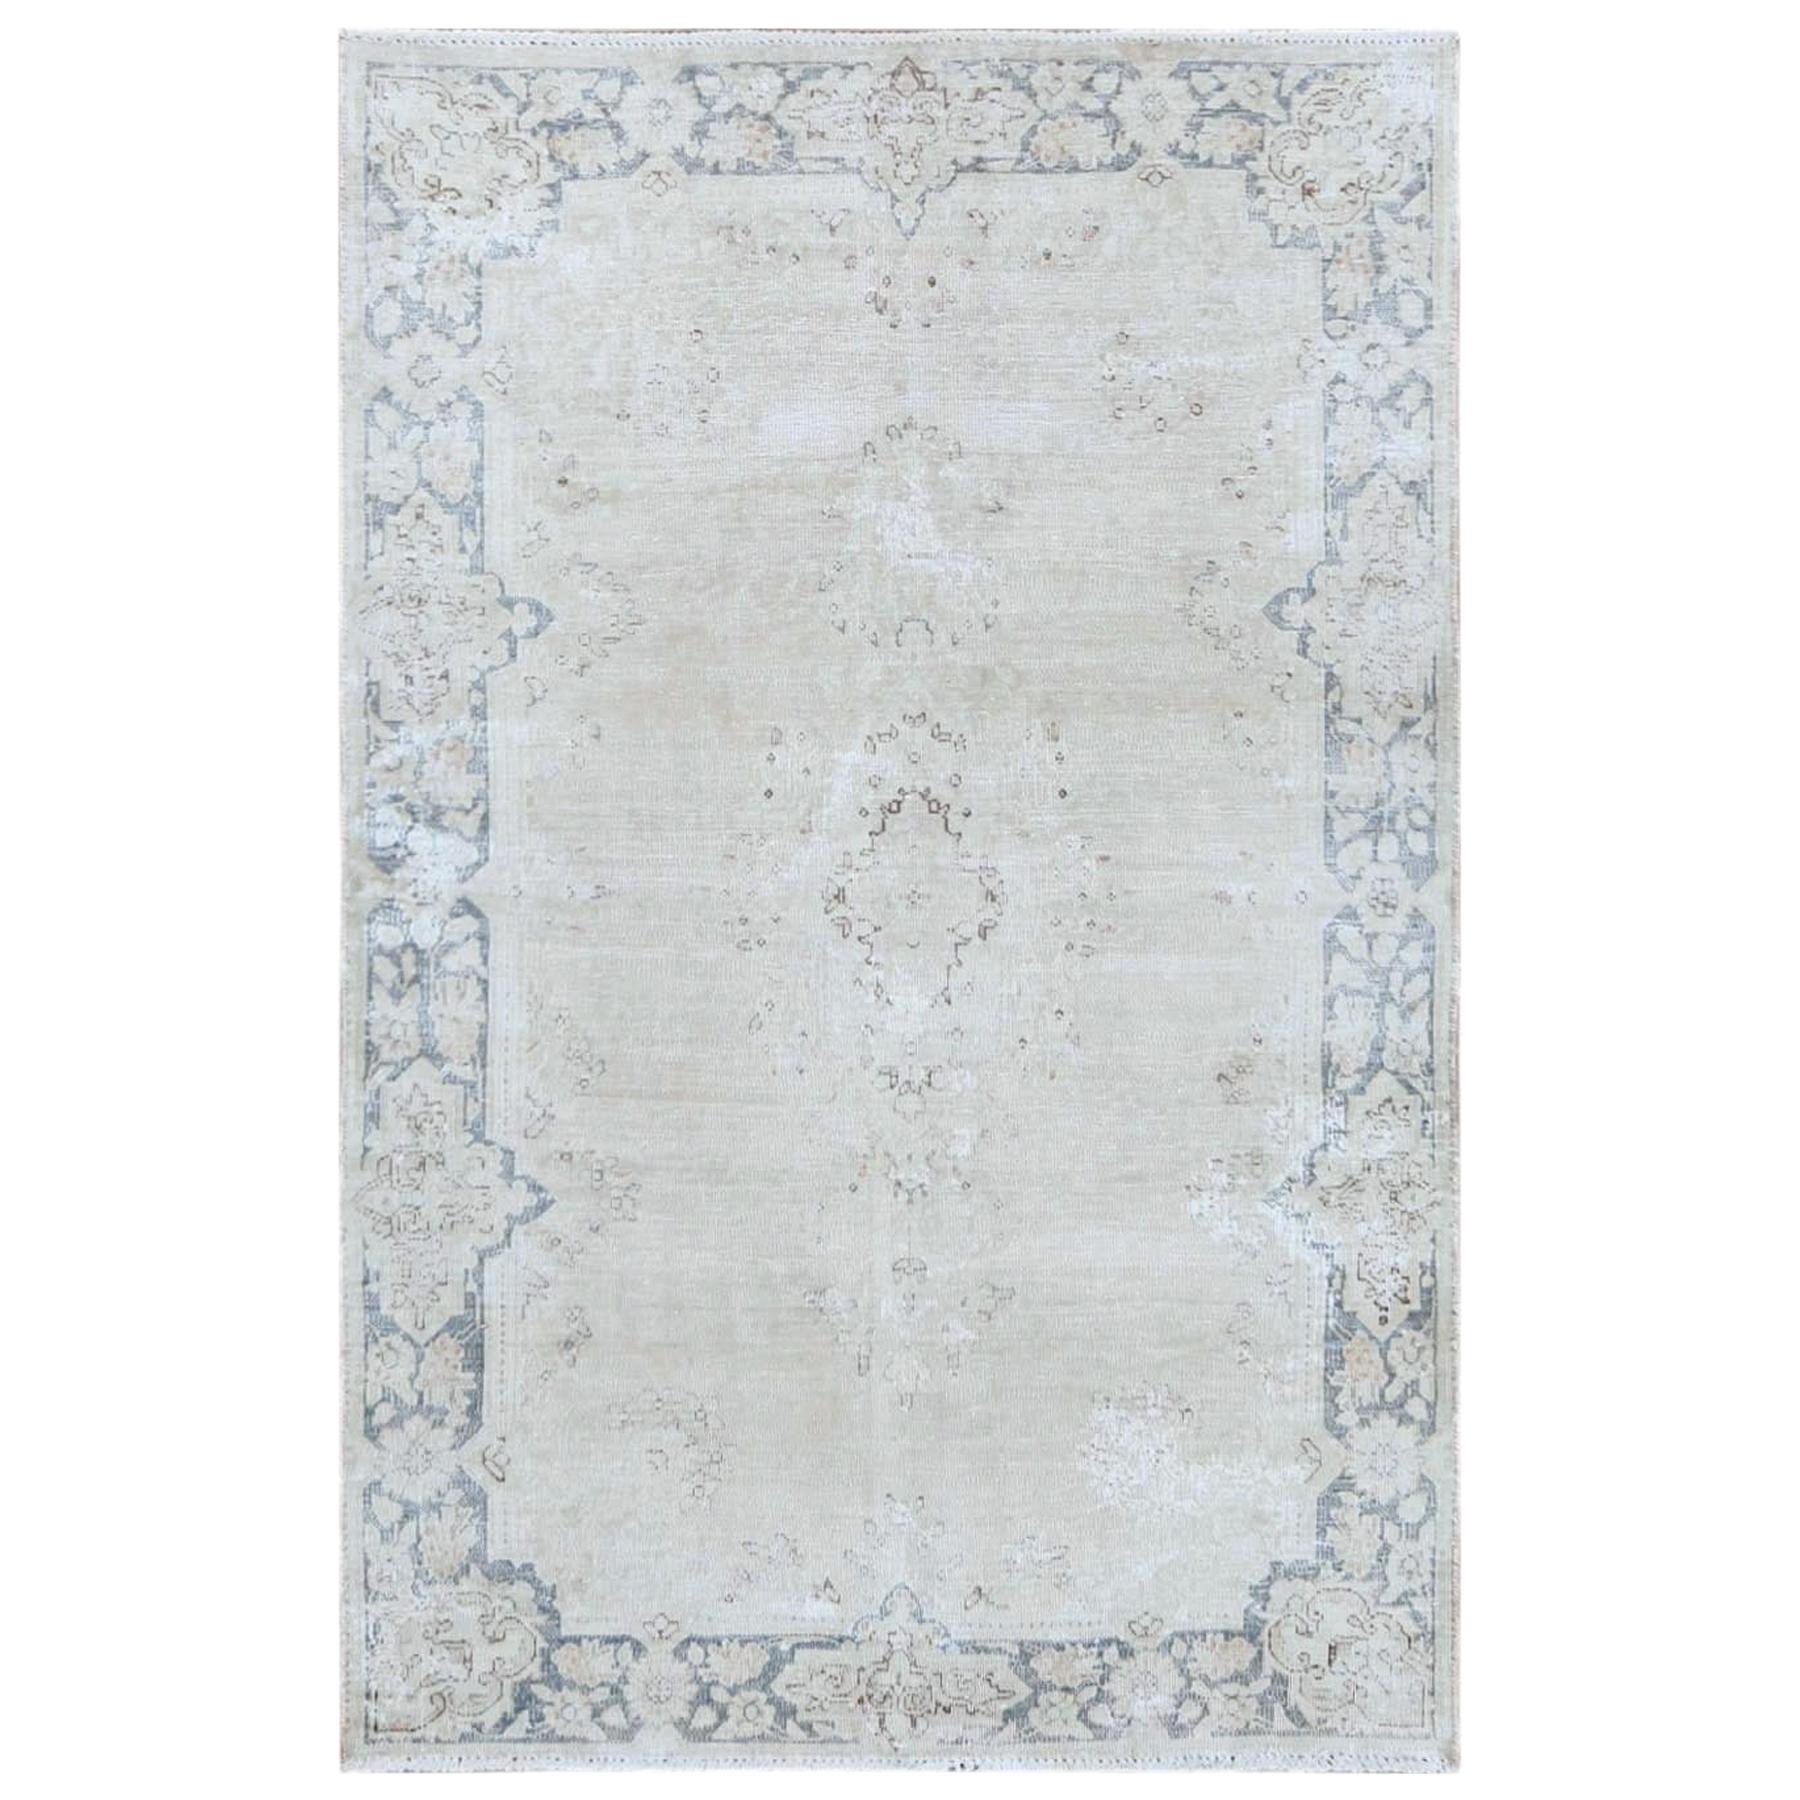 This fabulous hand-knotted carpet has been created and designed for extra strength and durability. This rug has been handcrafted for weeks in the traditional method that is used to make Rugs. This is truly a one-of-kind piece.

Exact rug size in